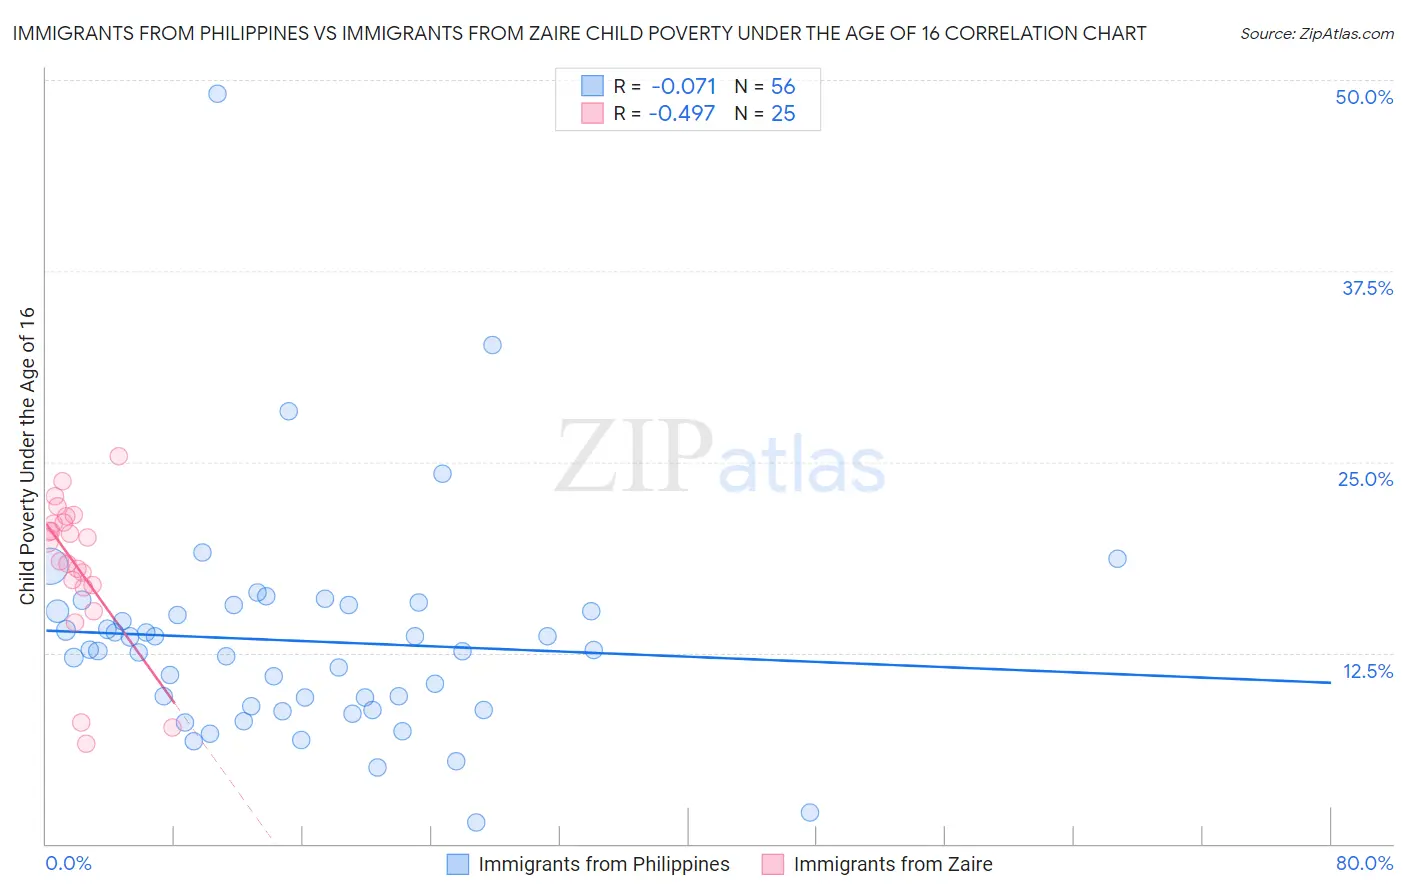 Immigrants from Philippines vs Immigrants from Zaire Child Poverty Under the Age of 16